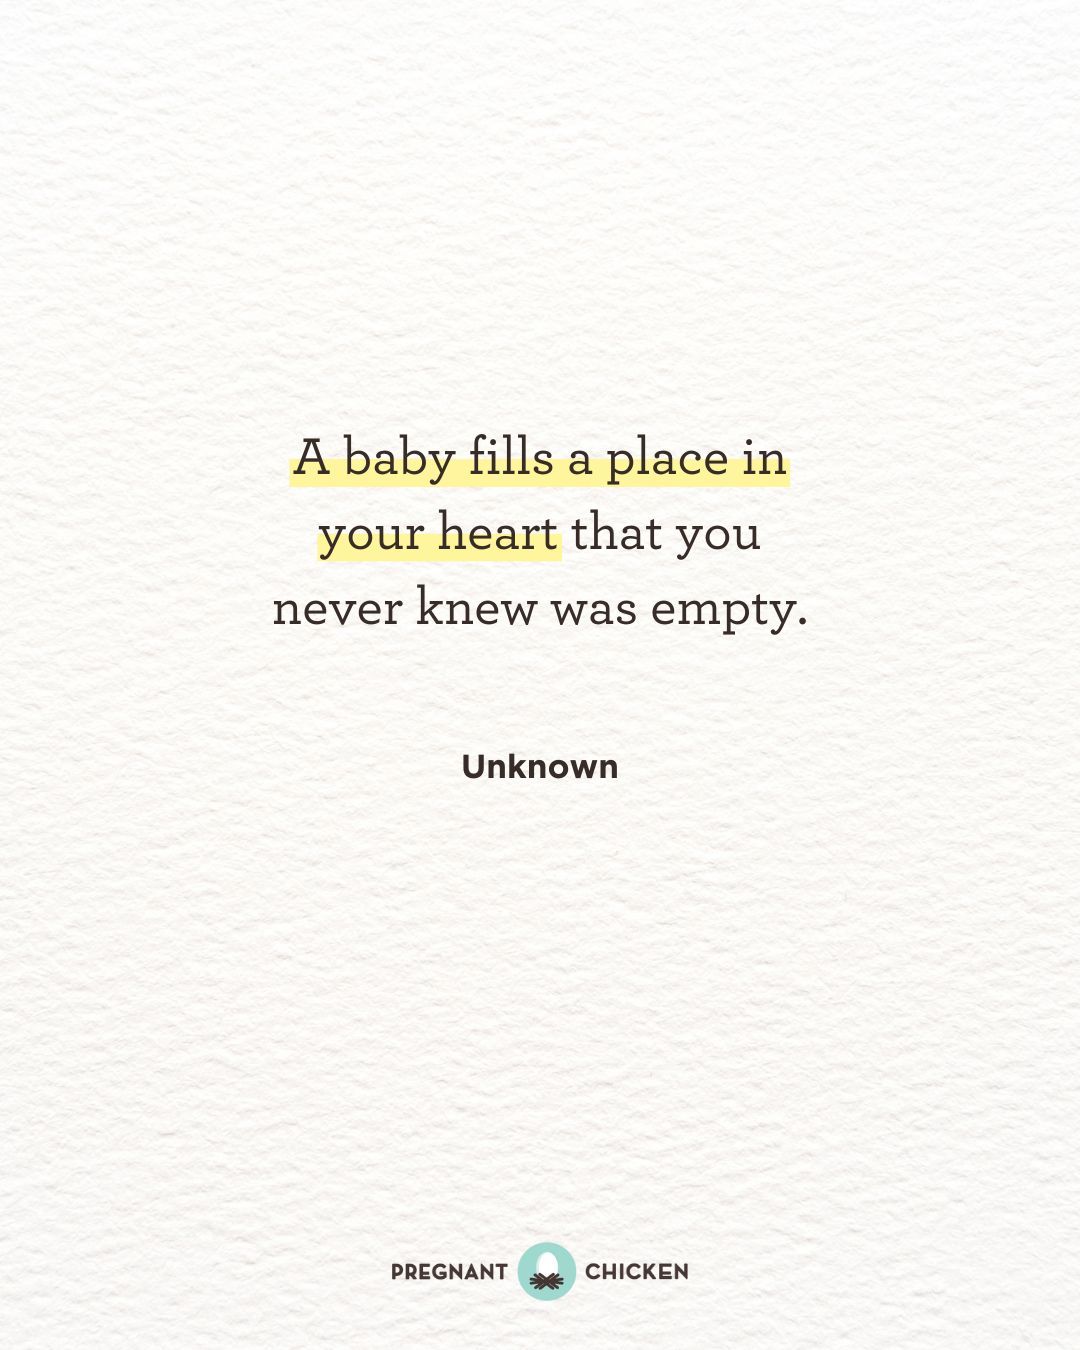 A baby fills a place in your heart that you never knew was empty.